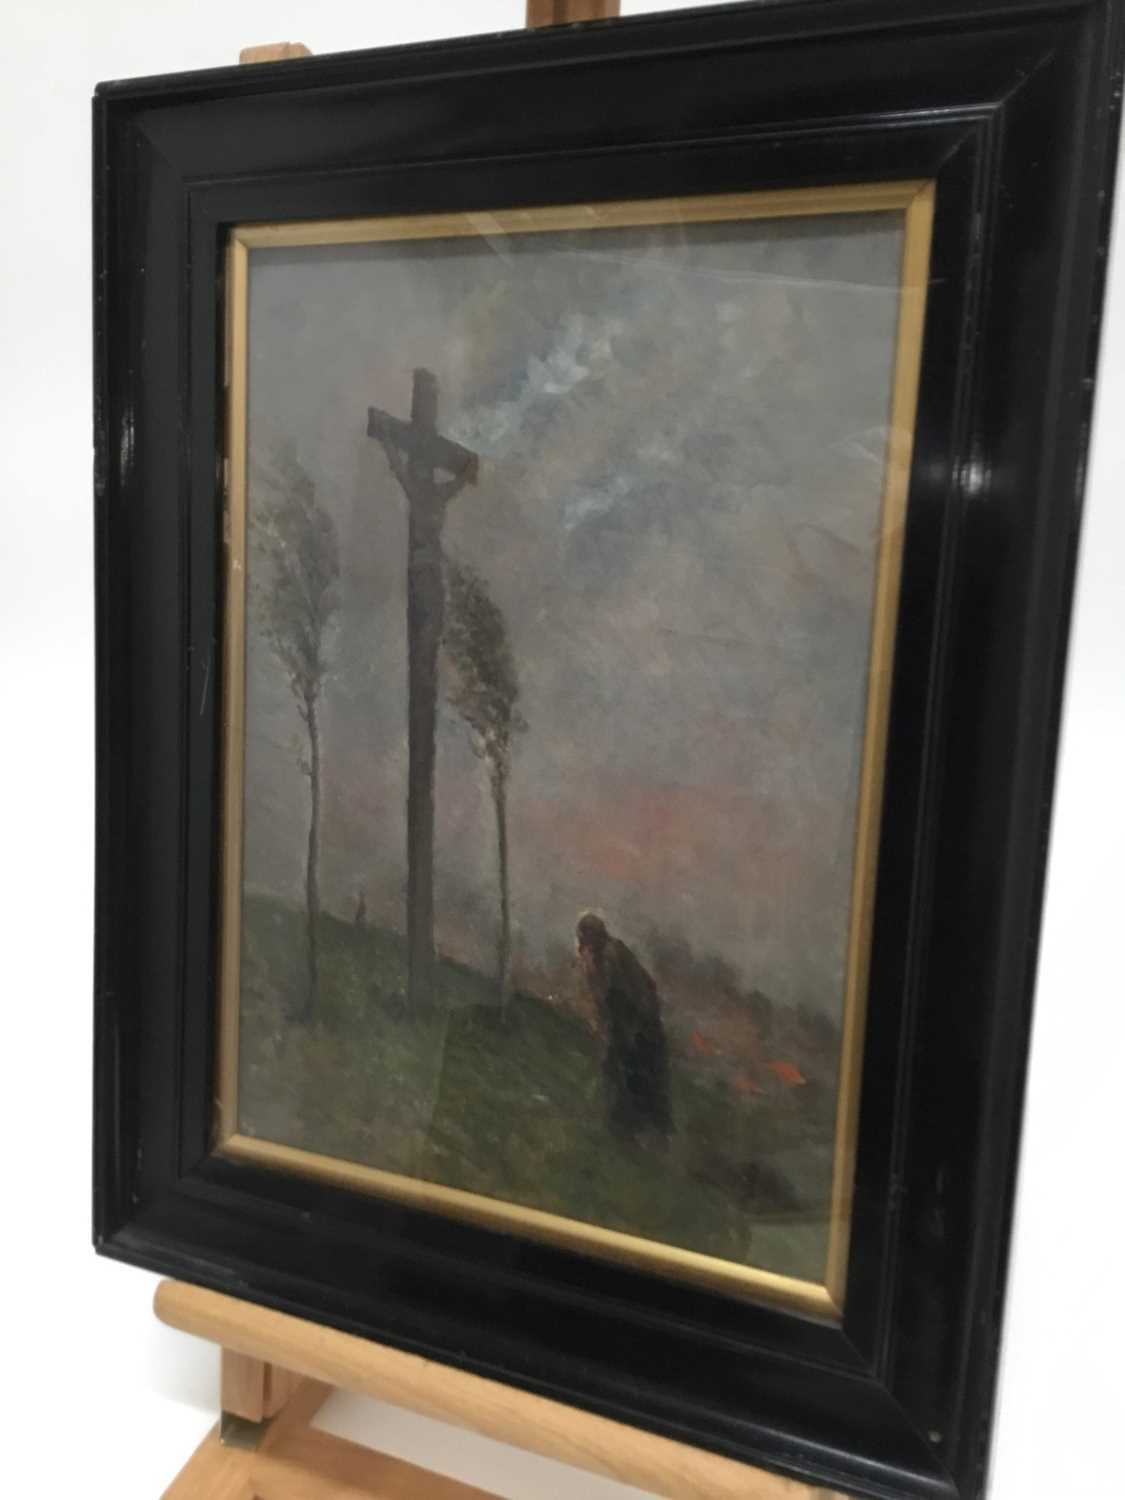 Arthur George Bell (1849-1916) framed oil painting of a crucifixion, the frame measuring 45.5cm x 35